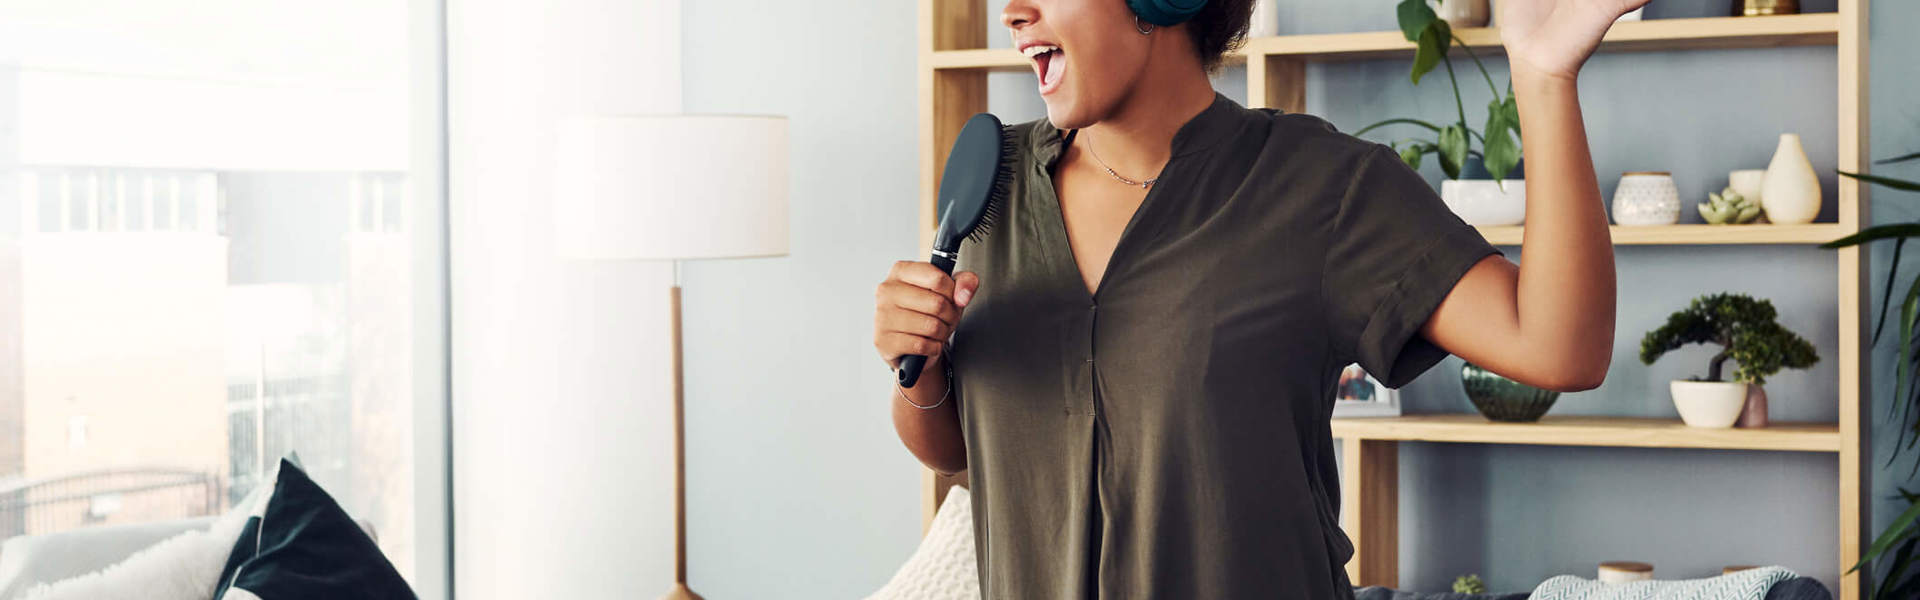 a woman singing into a hairbrush in the living room wearing headphones